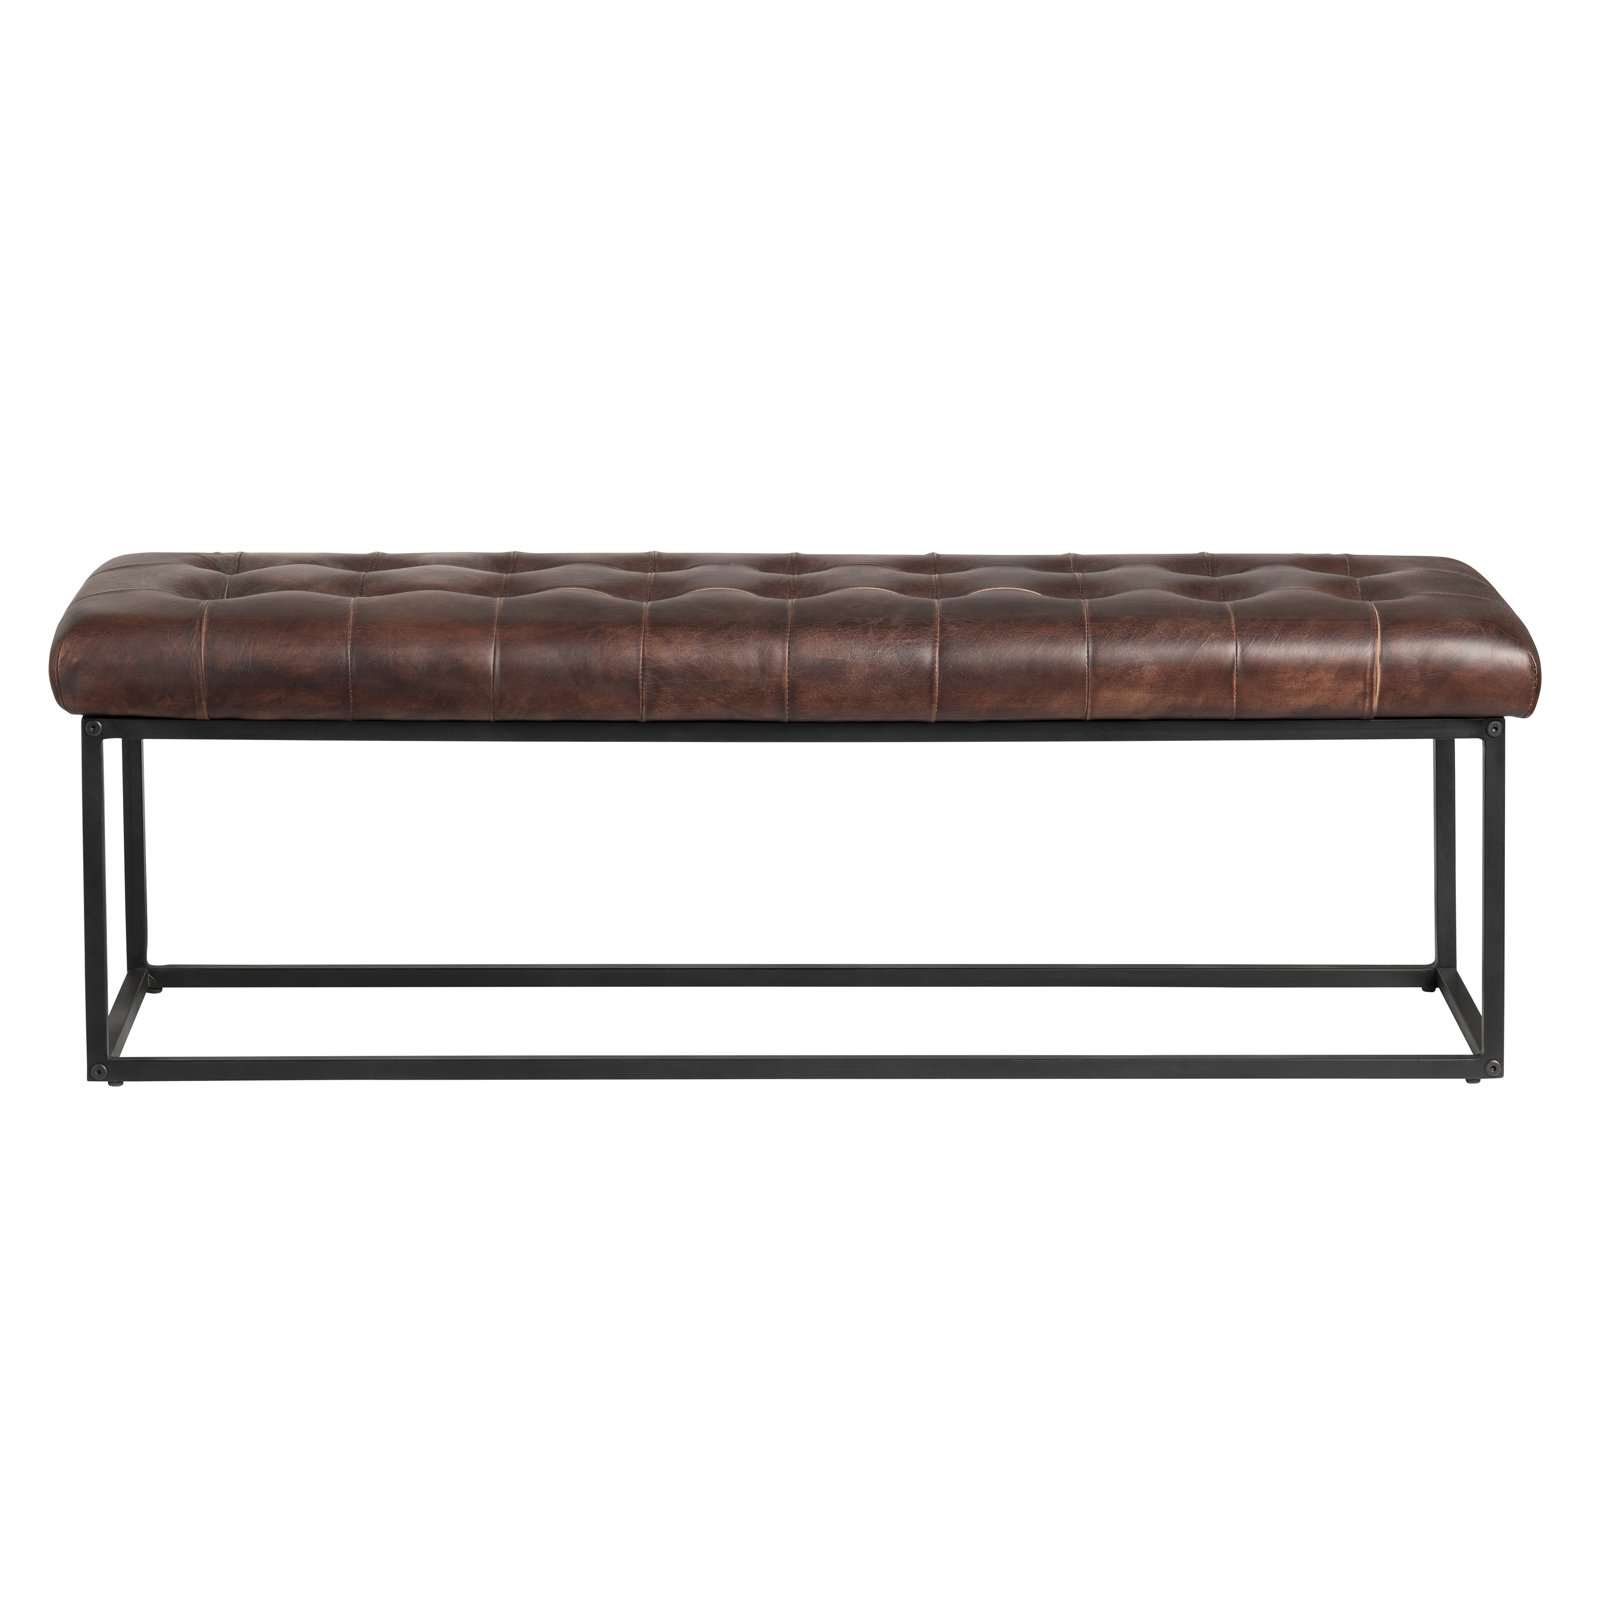 17 Stories Crader Faux Leather Bench